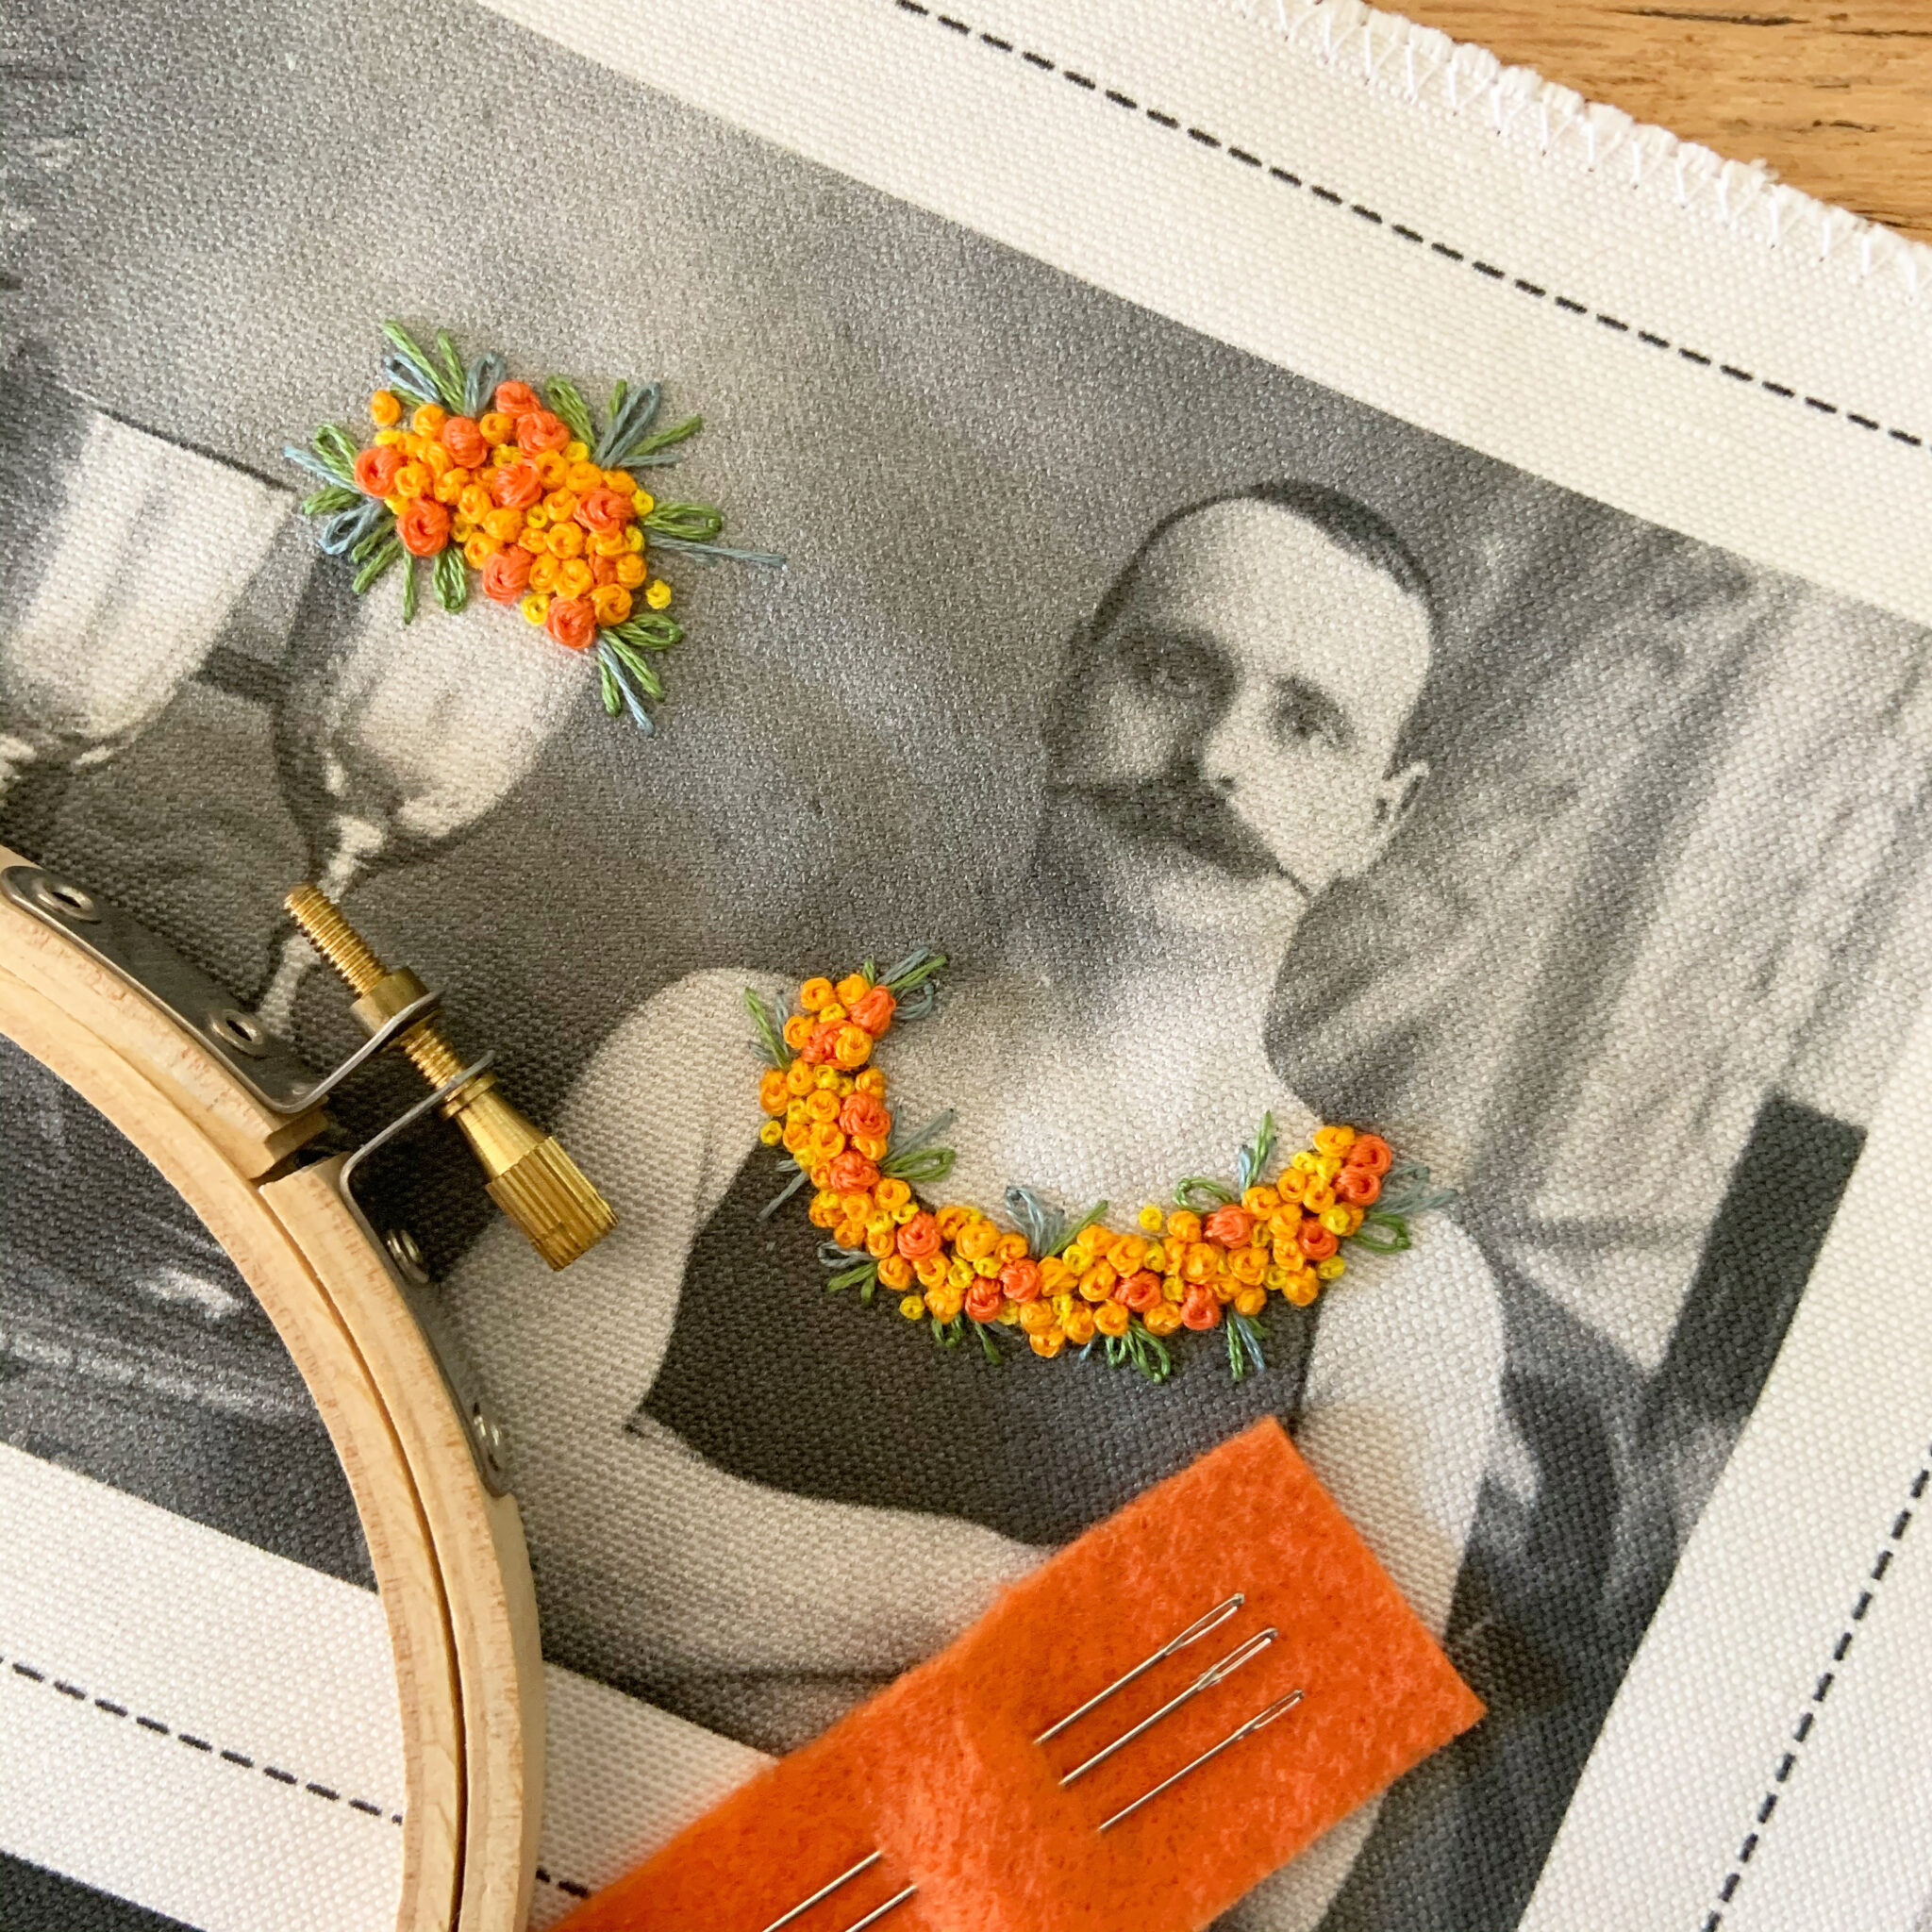 How to Print Your Photos on Fabric for Embroidery (and Beyond!)